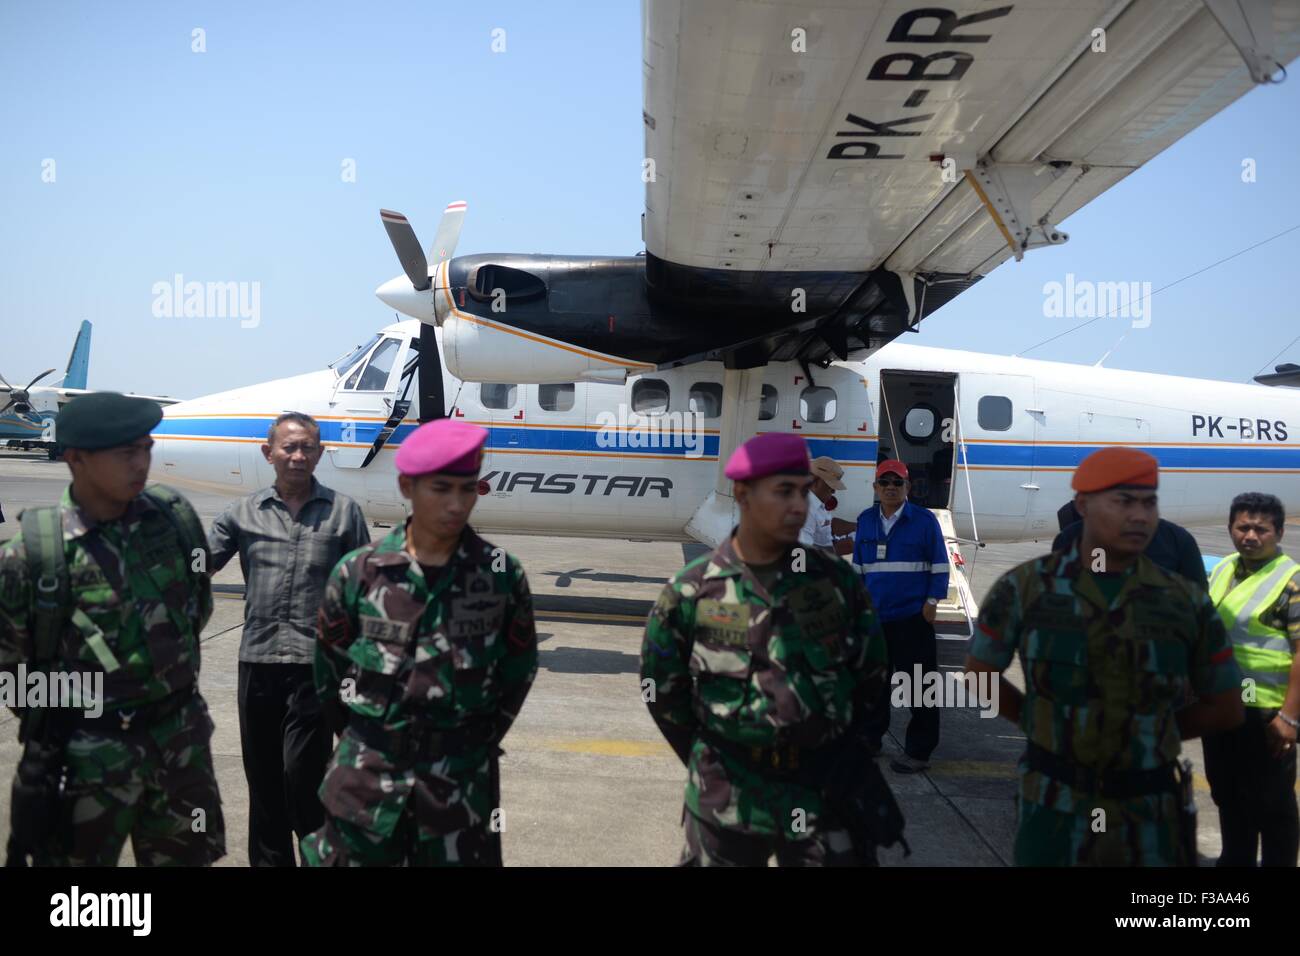 Jakarta, Indonesia. 3rd Oct, 2015. Soldiers prepare to search the Aviastar aircraft reported missing at Sultan Hasanuddin airport in Makassar, South Sulawesi, Indonesia, on Oct. 3, 2015. A small passenger plane with 10 people aboard lost contact near Sulawesi Island in eastern Indonesia on Friday, a Transport Ministry official said. © Lukas/Xinhua/Alamy Live News Stock Photo